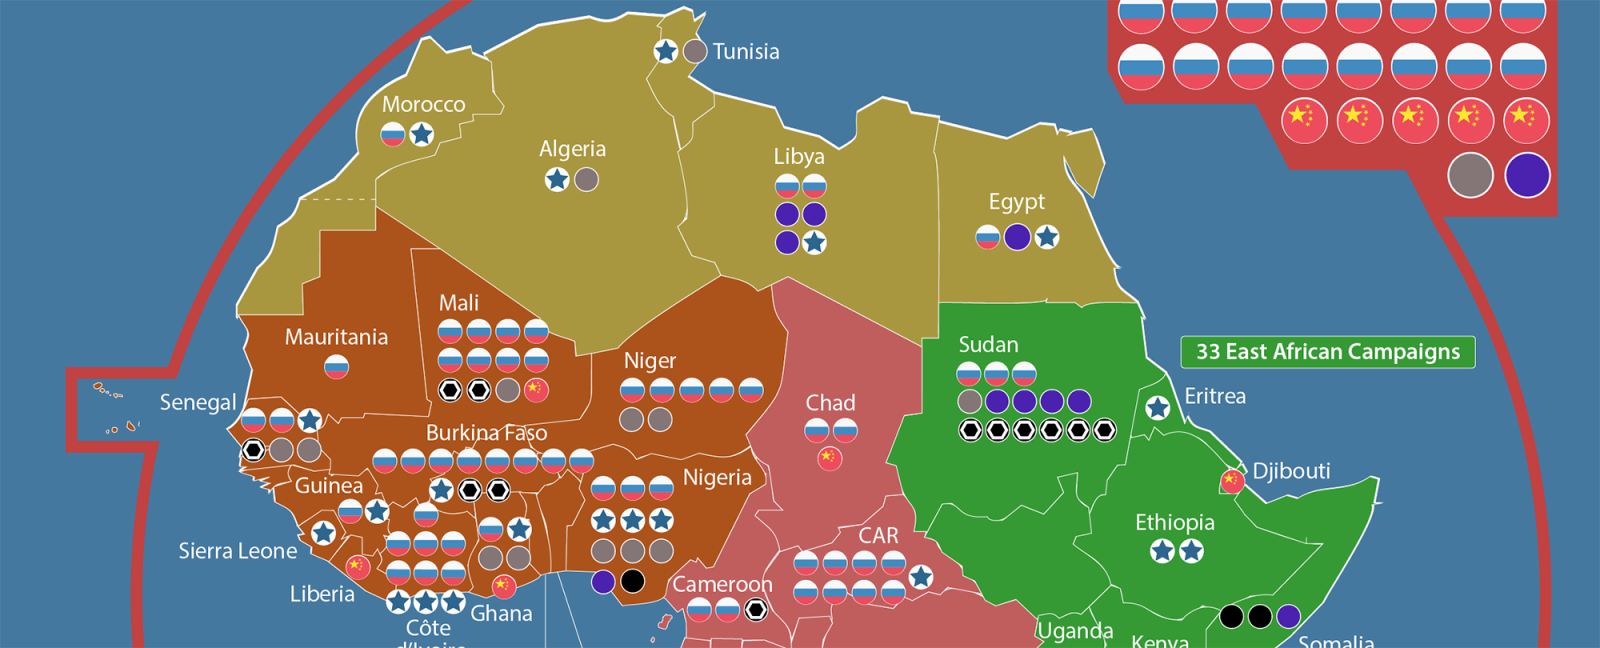 Mapping a Surge of Disinformation in Africa